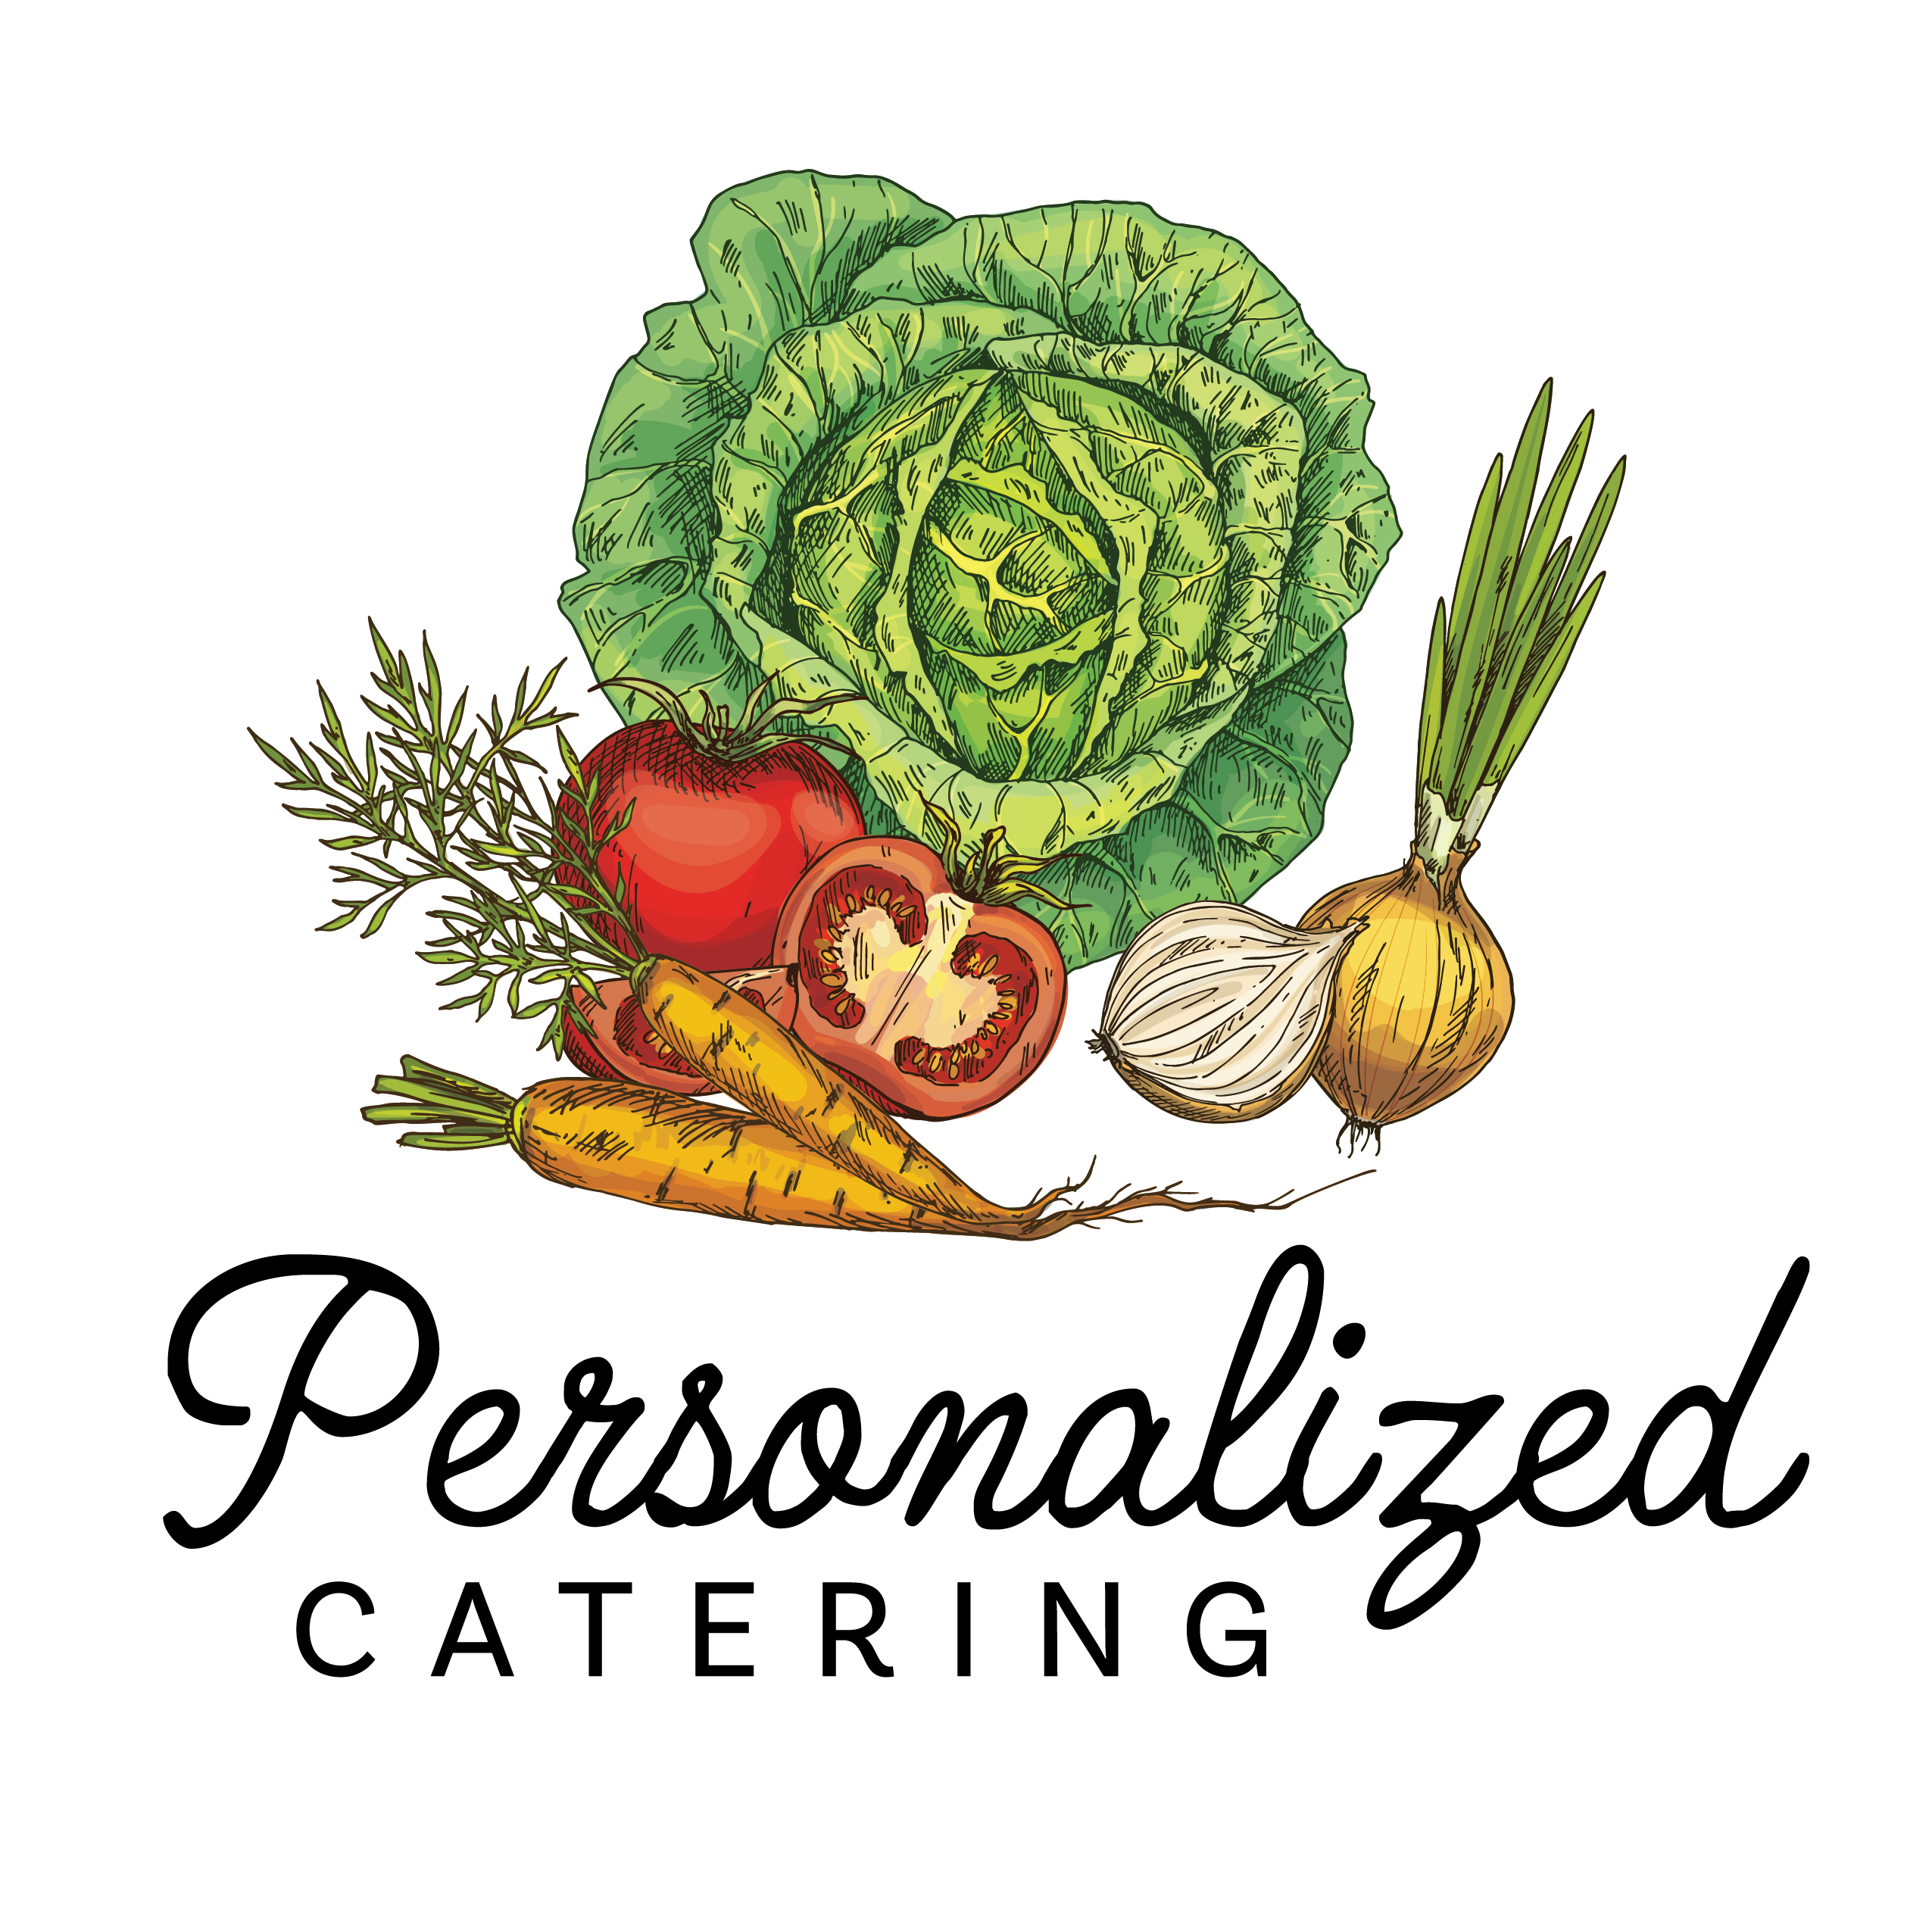 PERSONALIZED CATERING